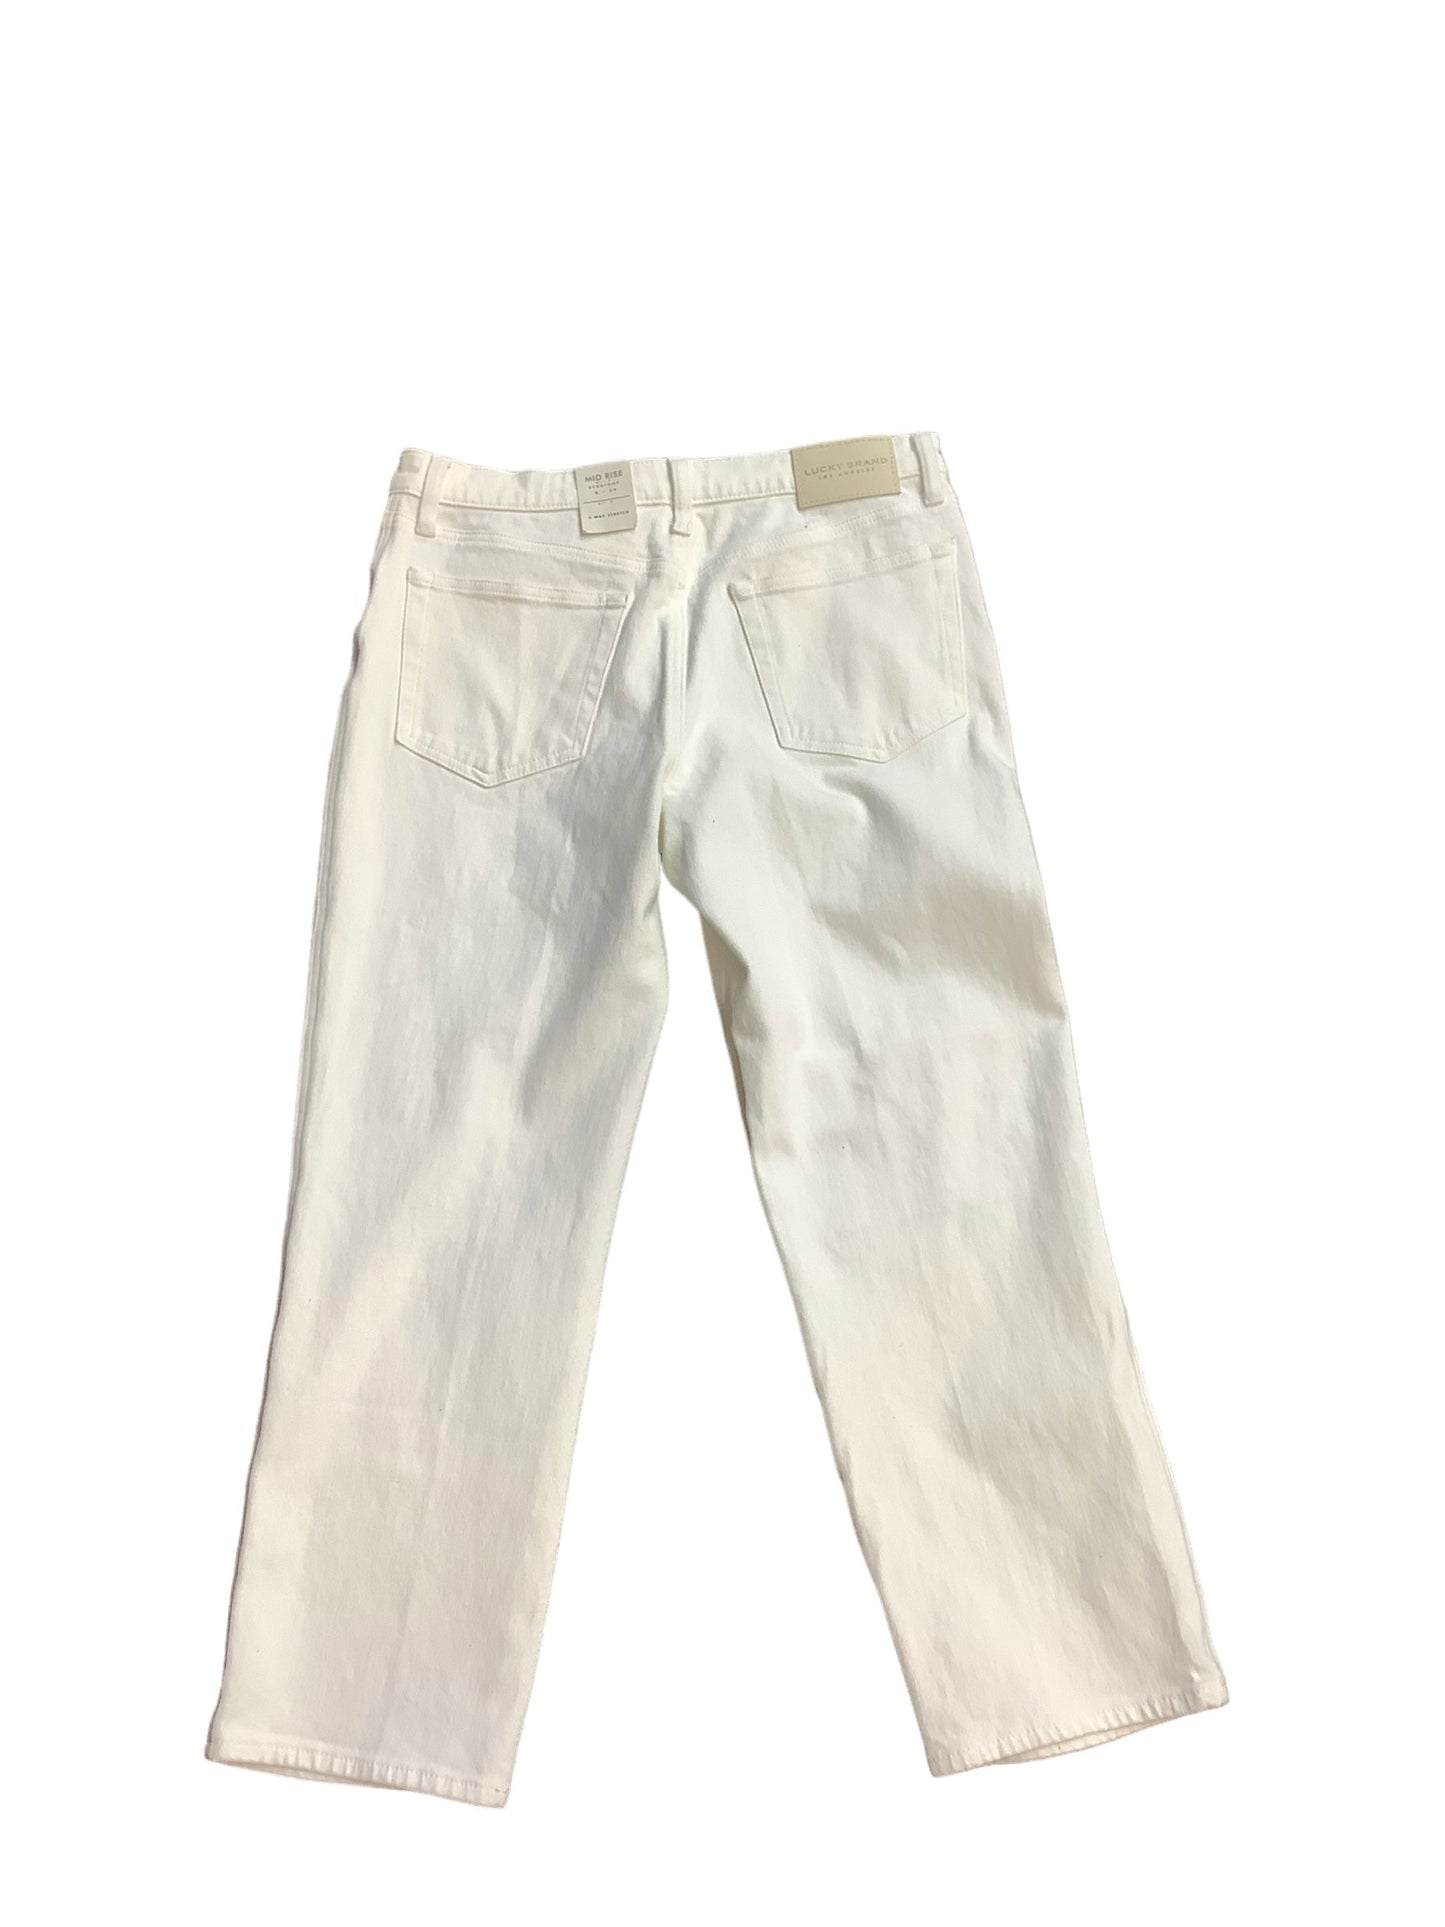 White Jeans Boot Cut Lucky Brand, Size 8